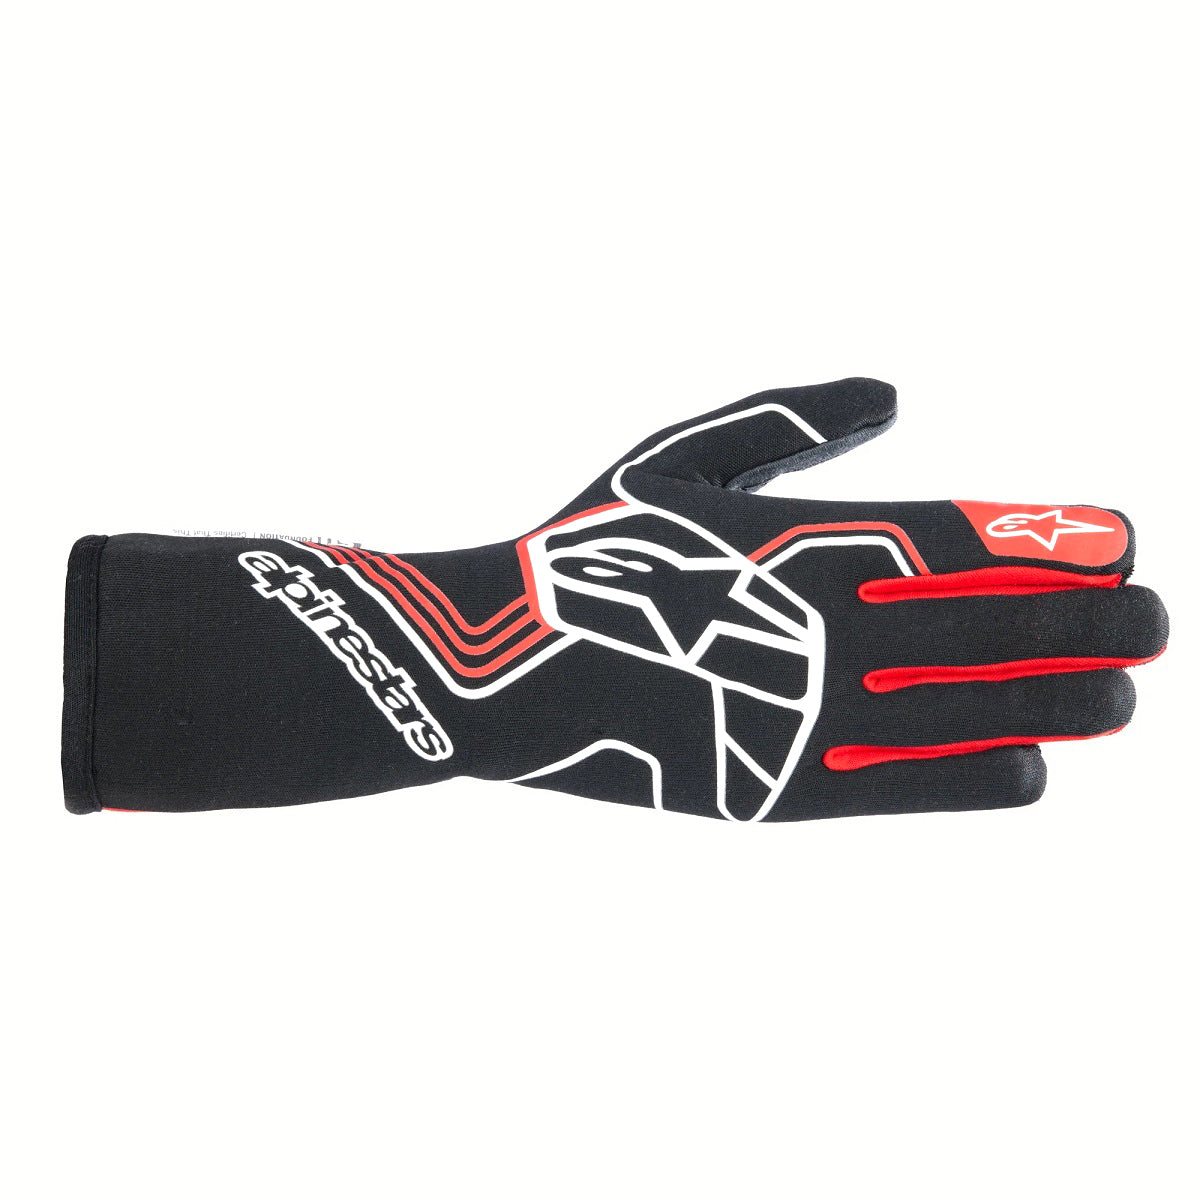 Alpinestars Glove Tech-1 Race V4 Black / Red Large Safety Clothing Driving Gloves main image